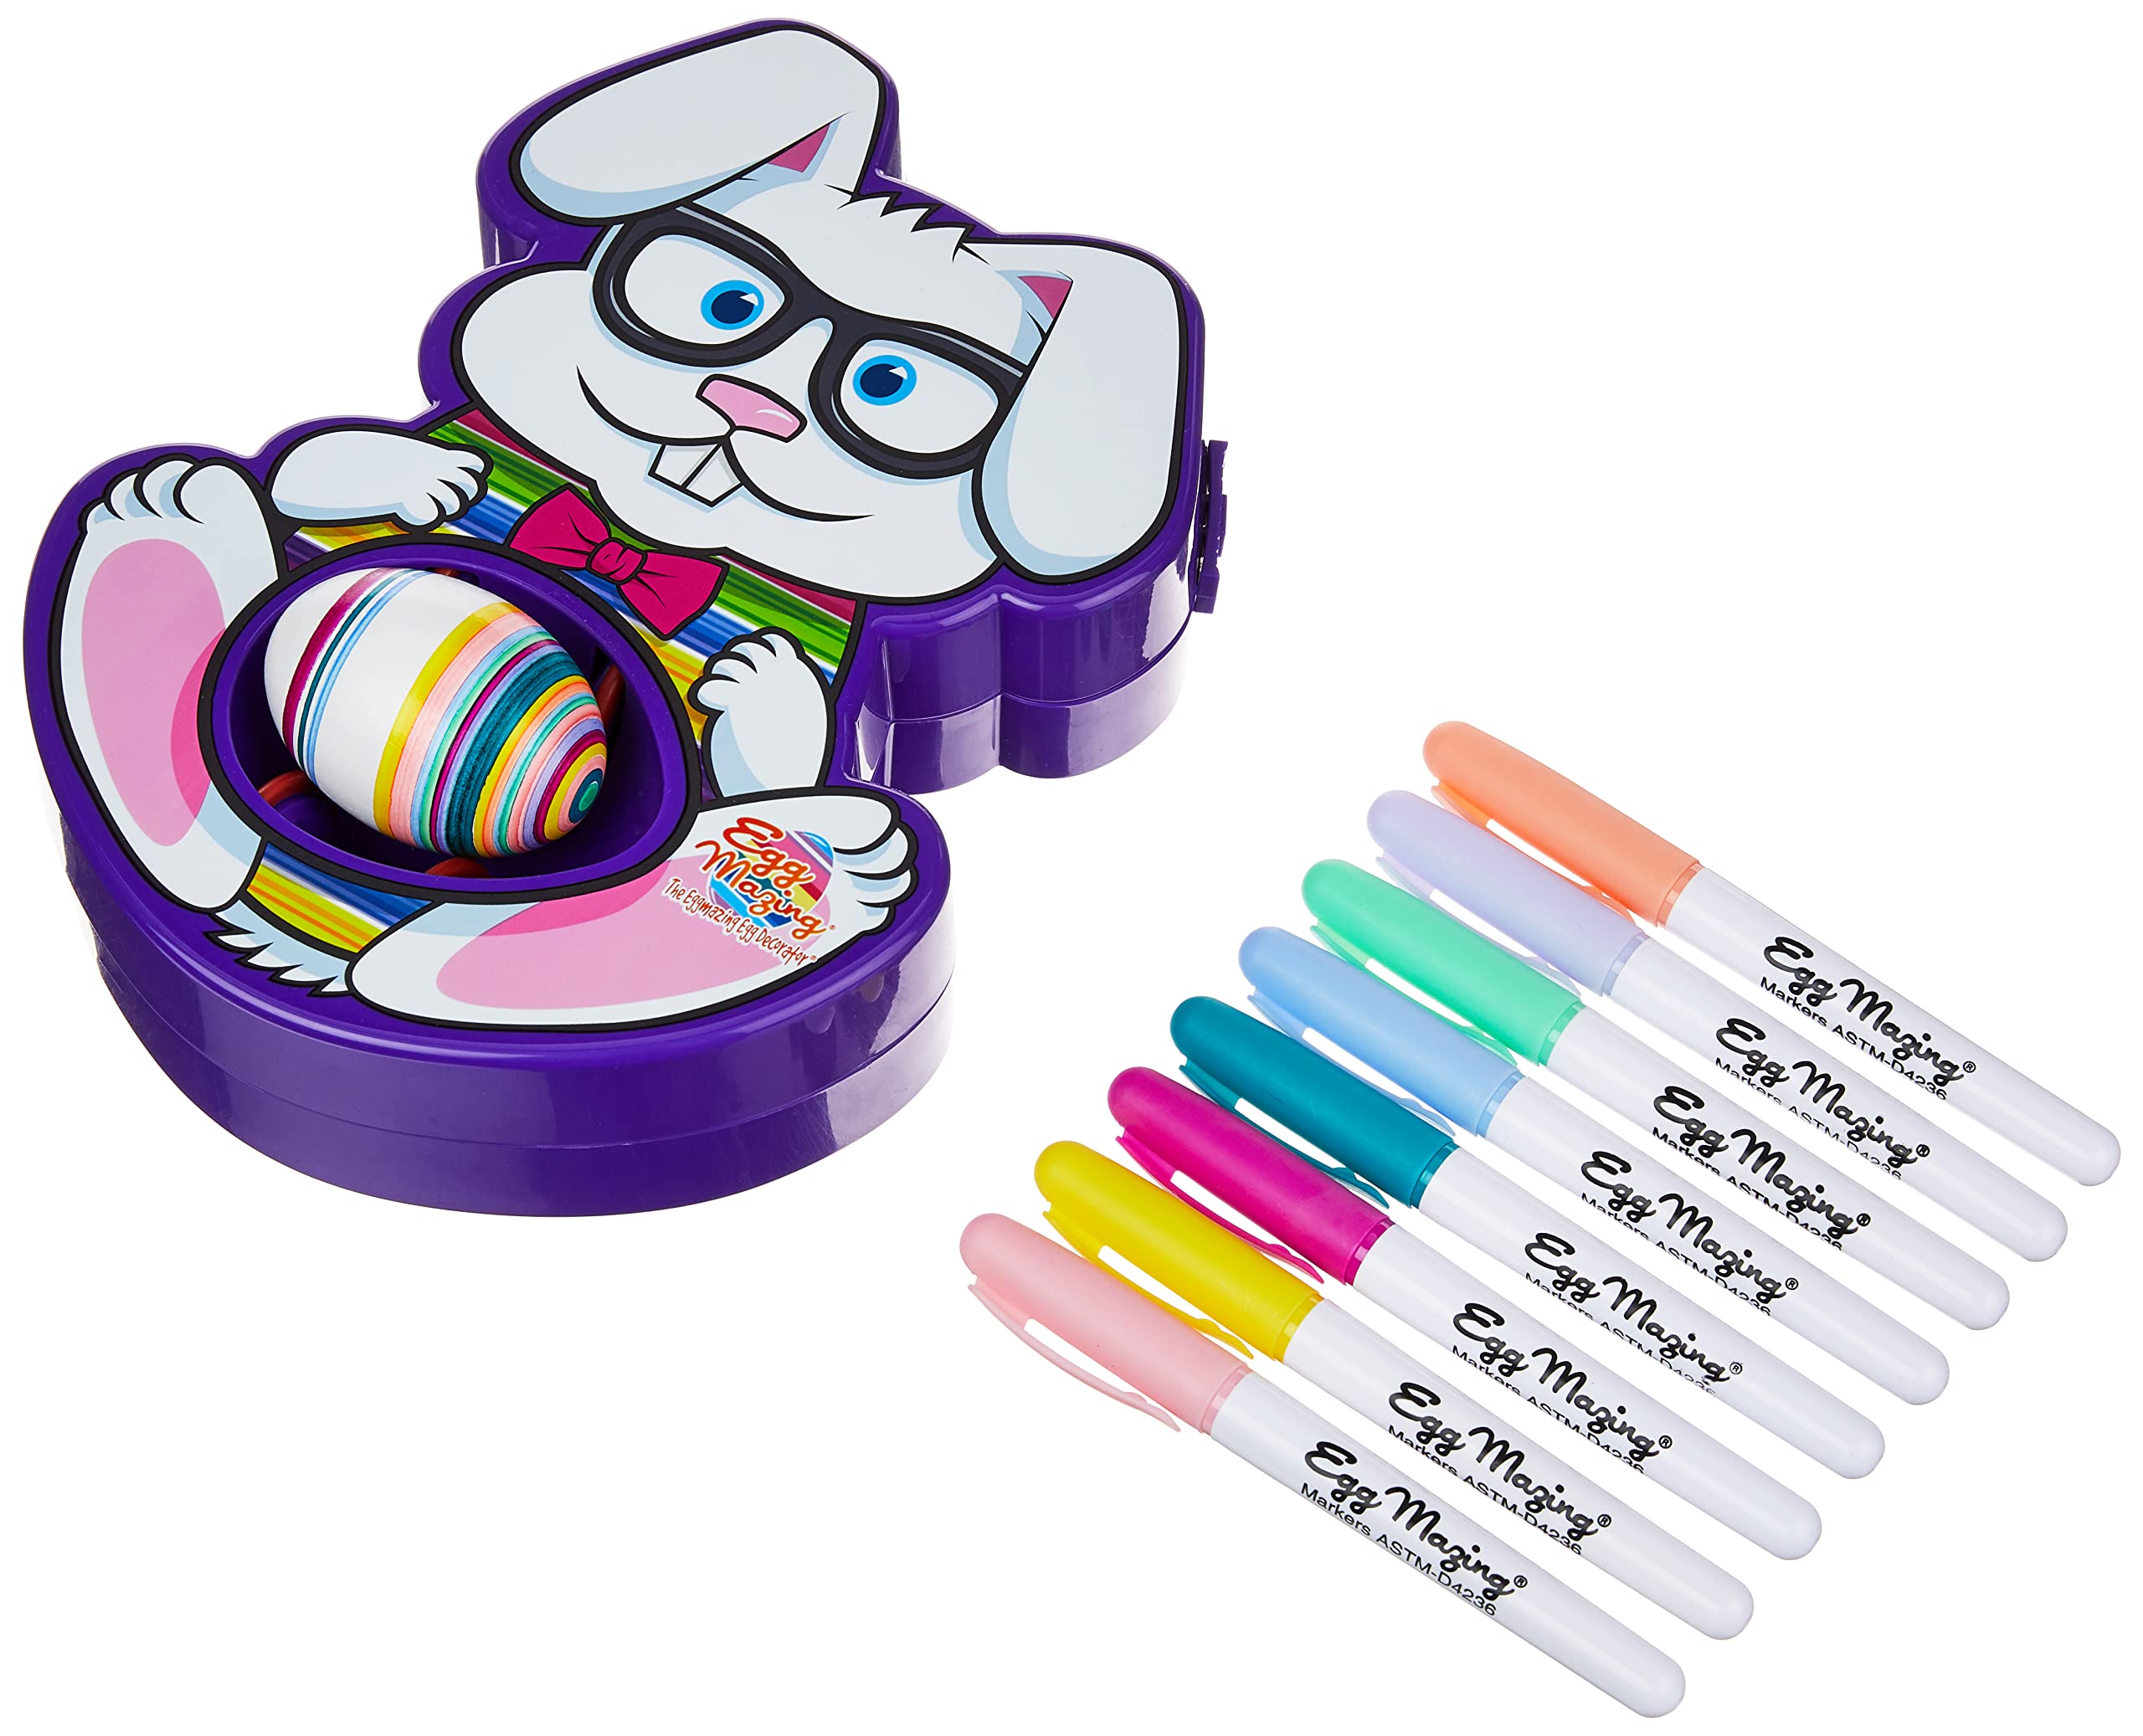 The Eggmazing Egg Decorator Kit - Includes Bunny Egg Decorating Spinner Arts and Crafts Set with 8 Colorful Quick Drying Markers [Packaging May Vary]